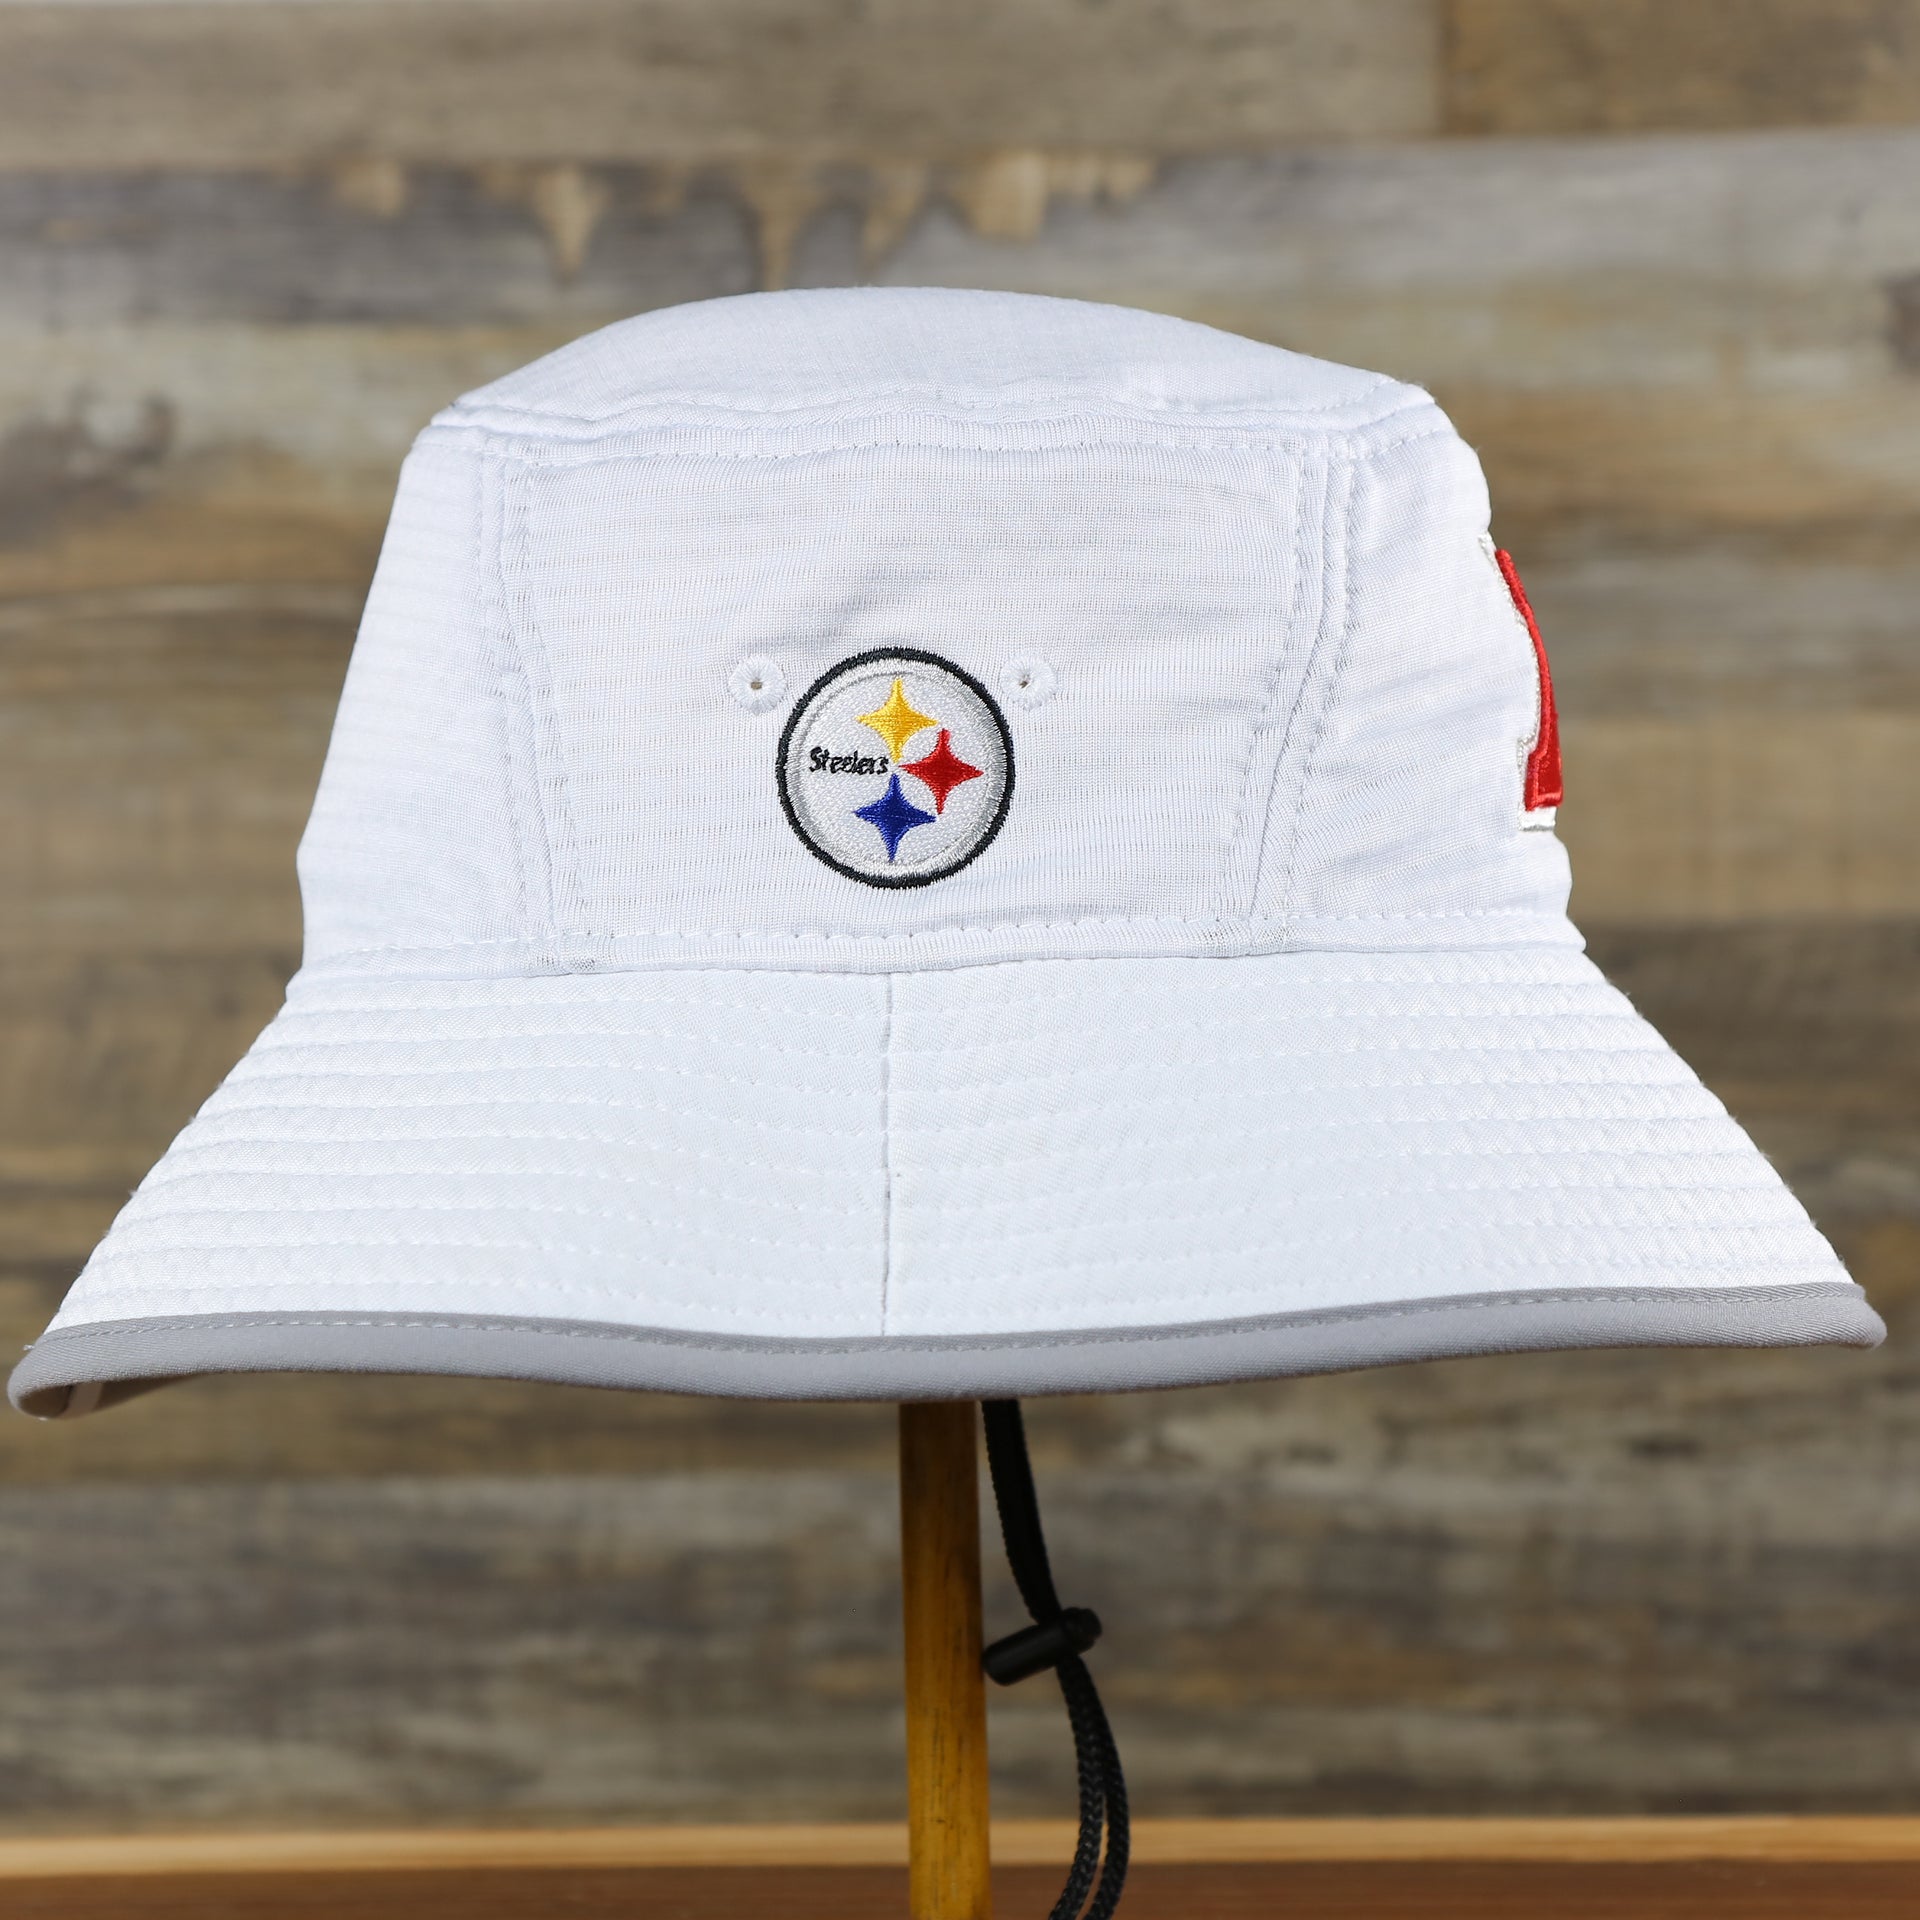 steelers logo on the Pittsburgh Steelers 2022 Pro Bowl AFC Logo Steelers Side Patch White Bucket Hat